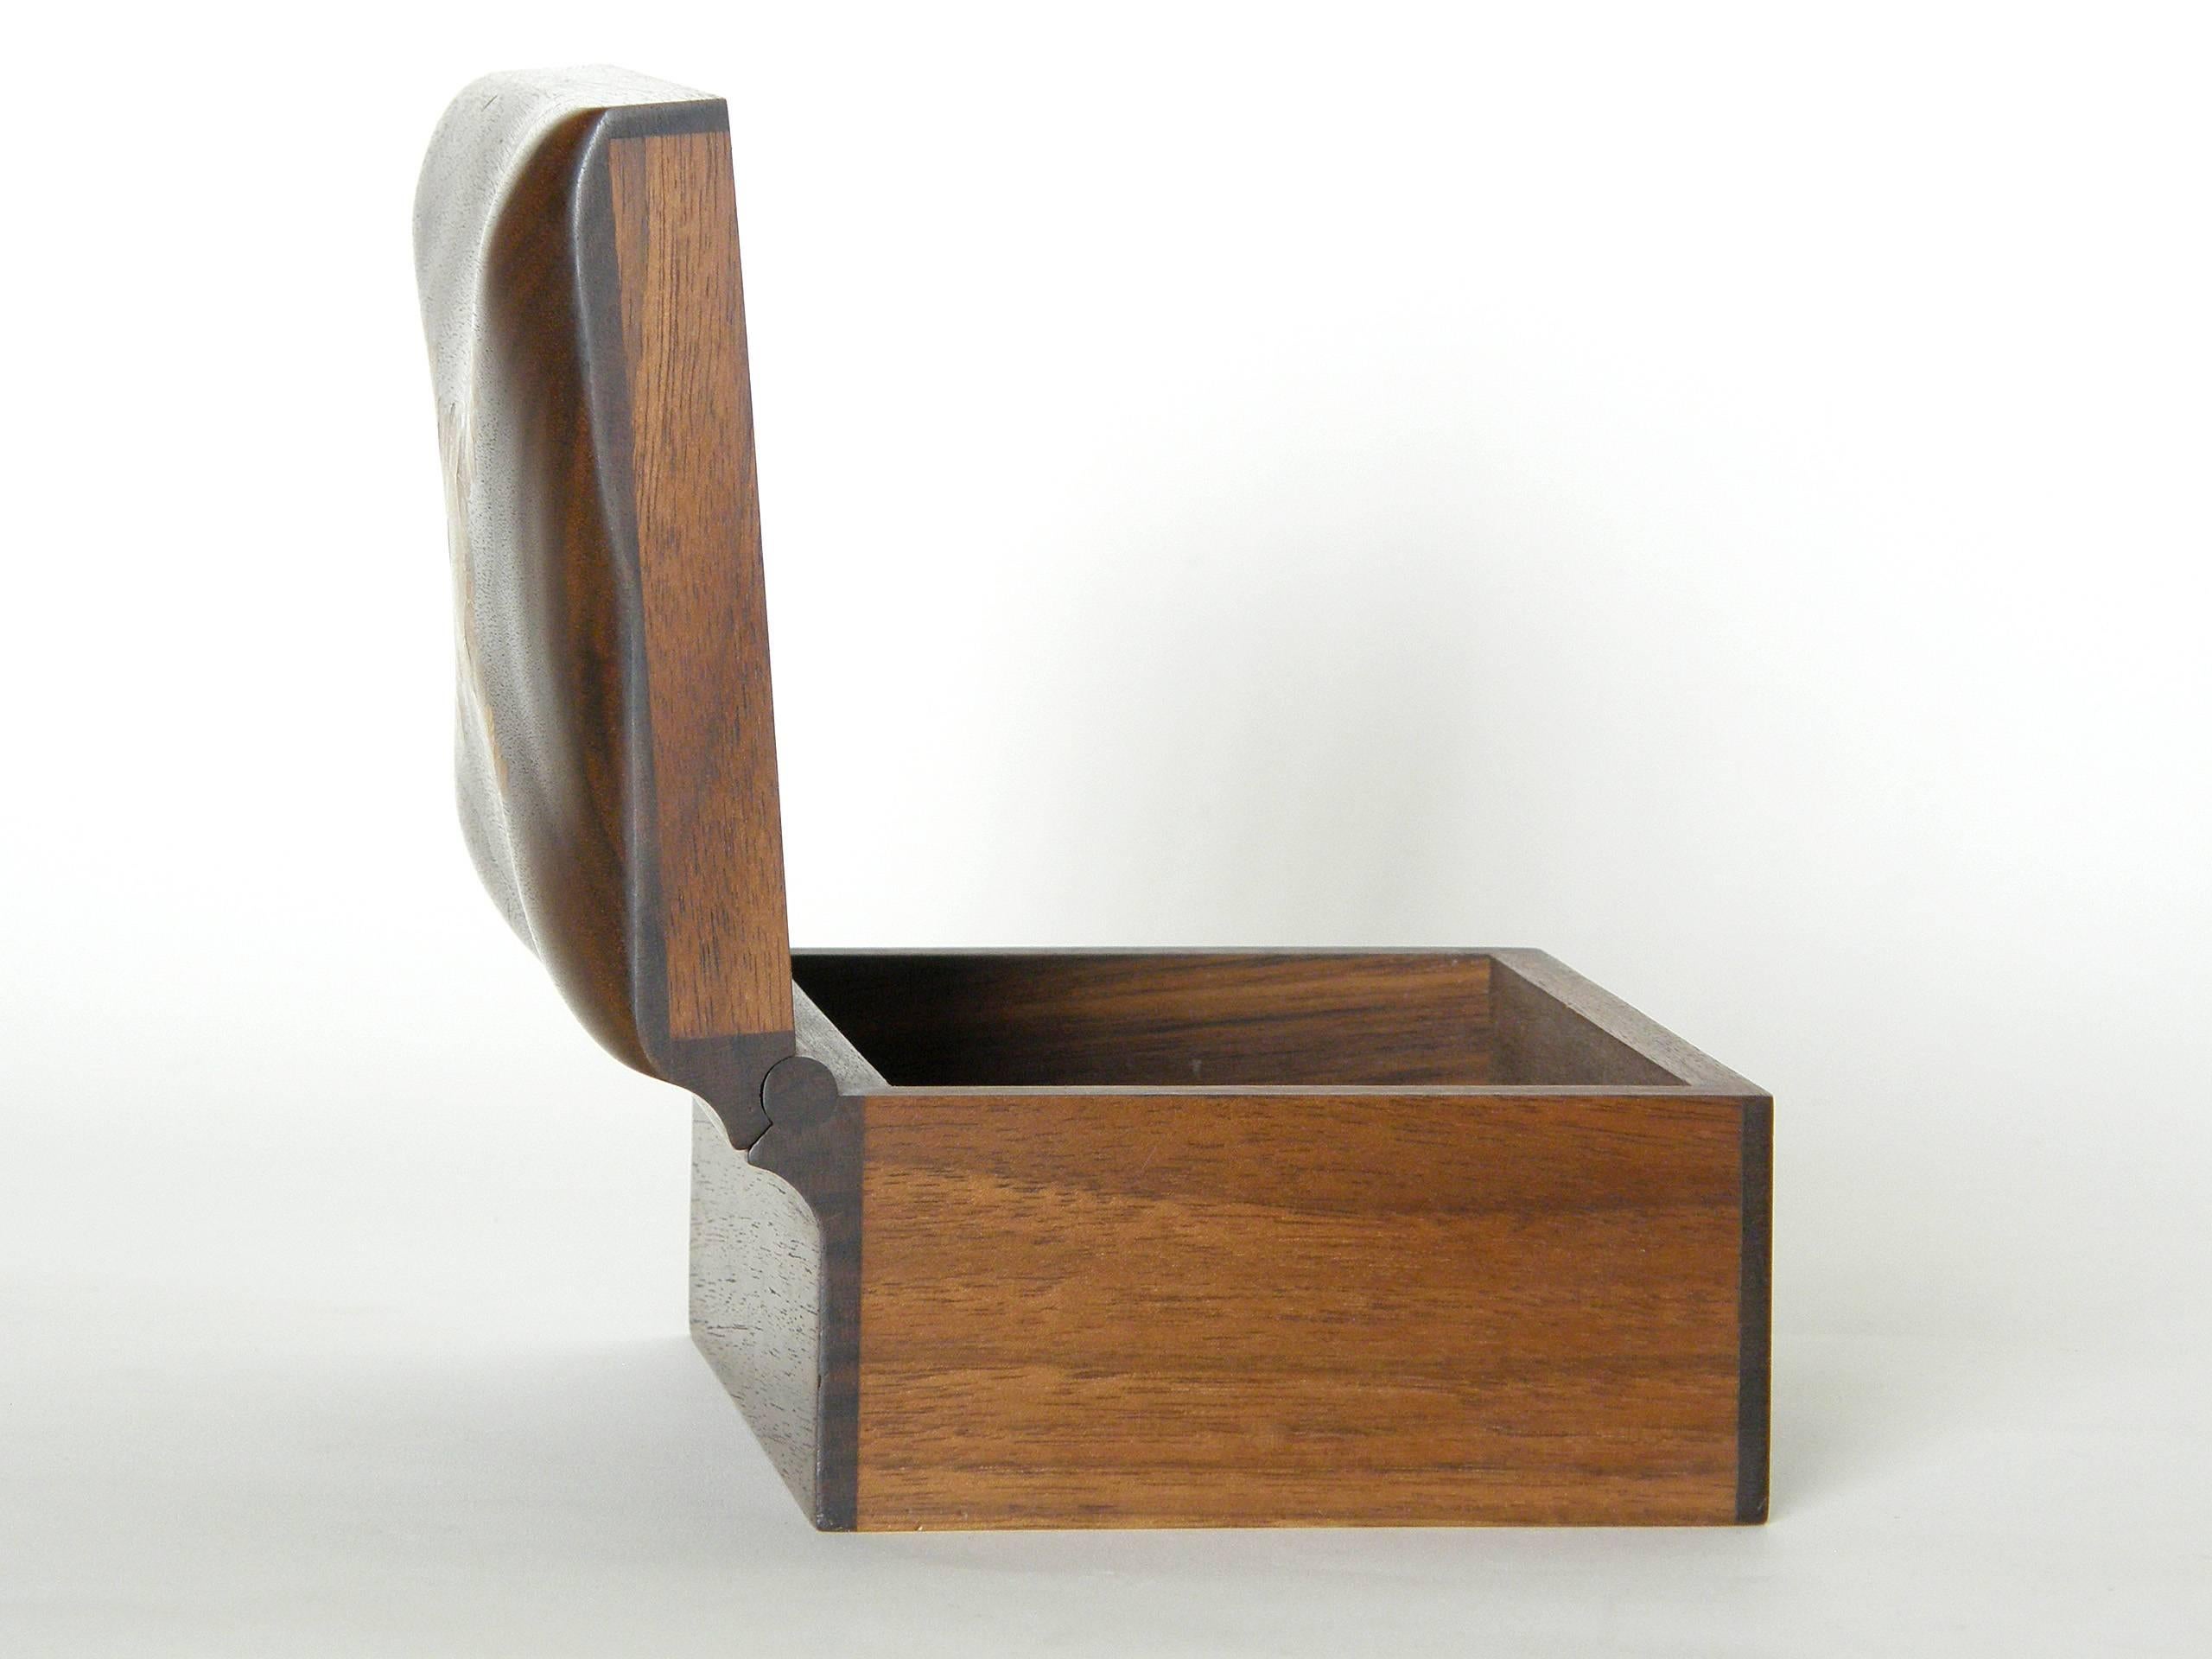 American Craftsman Roger Sloan Carved Wood Box Walnut with Inlaid Oak Root Cross Sections on Lid